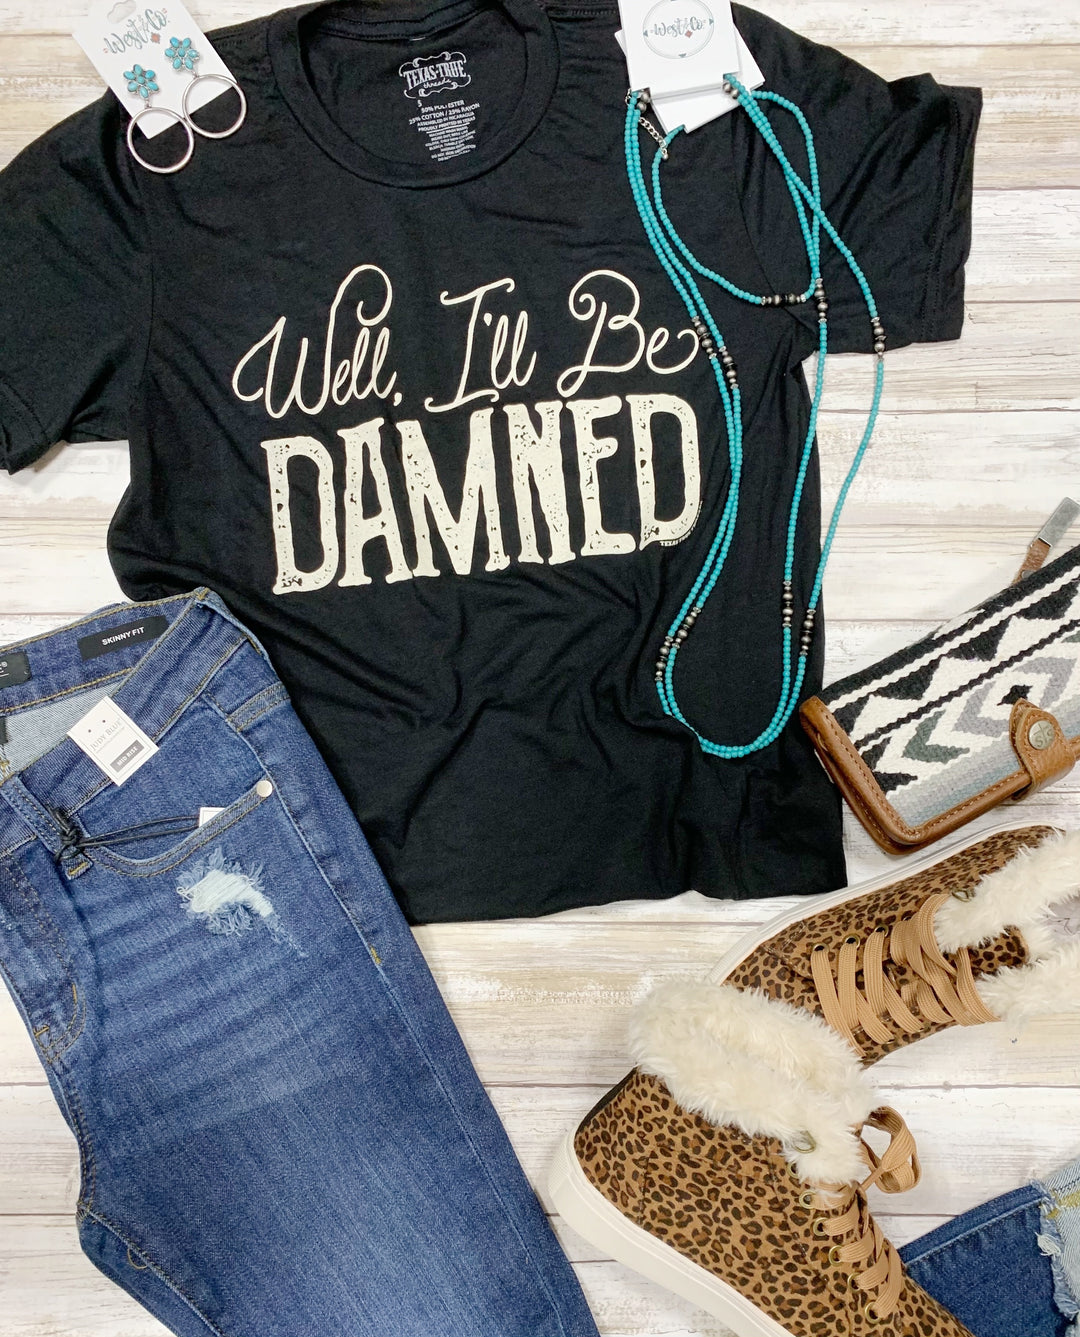 Well I'll Be Damned Tee by Texas True Threads